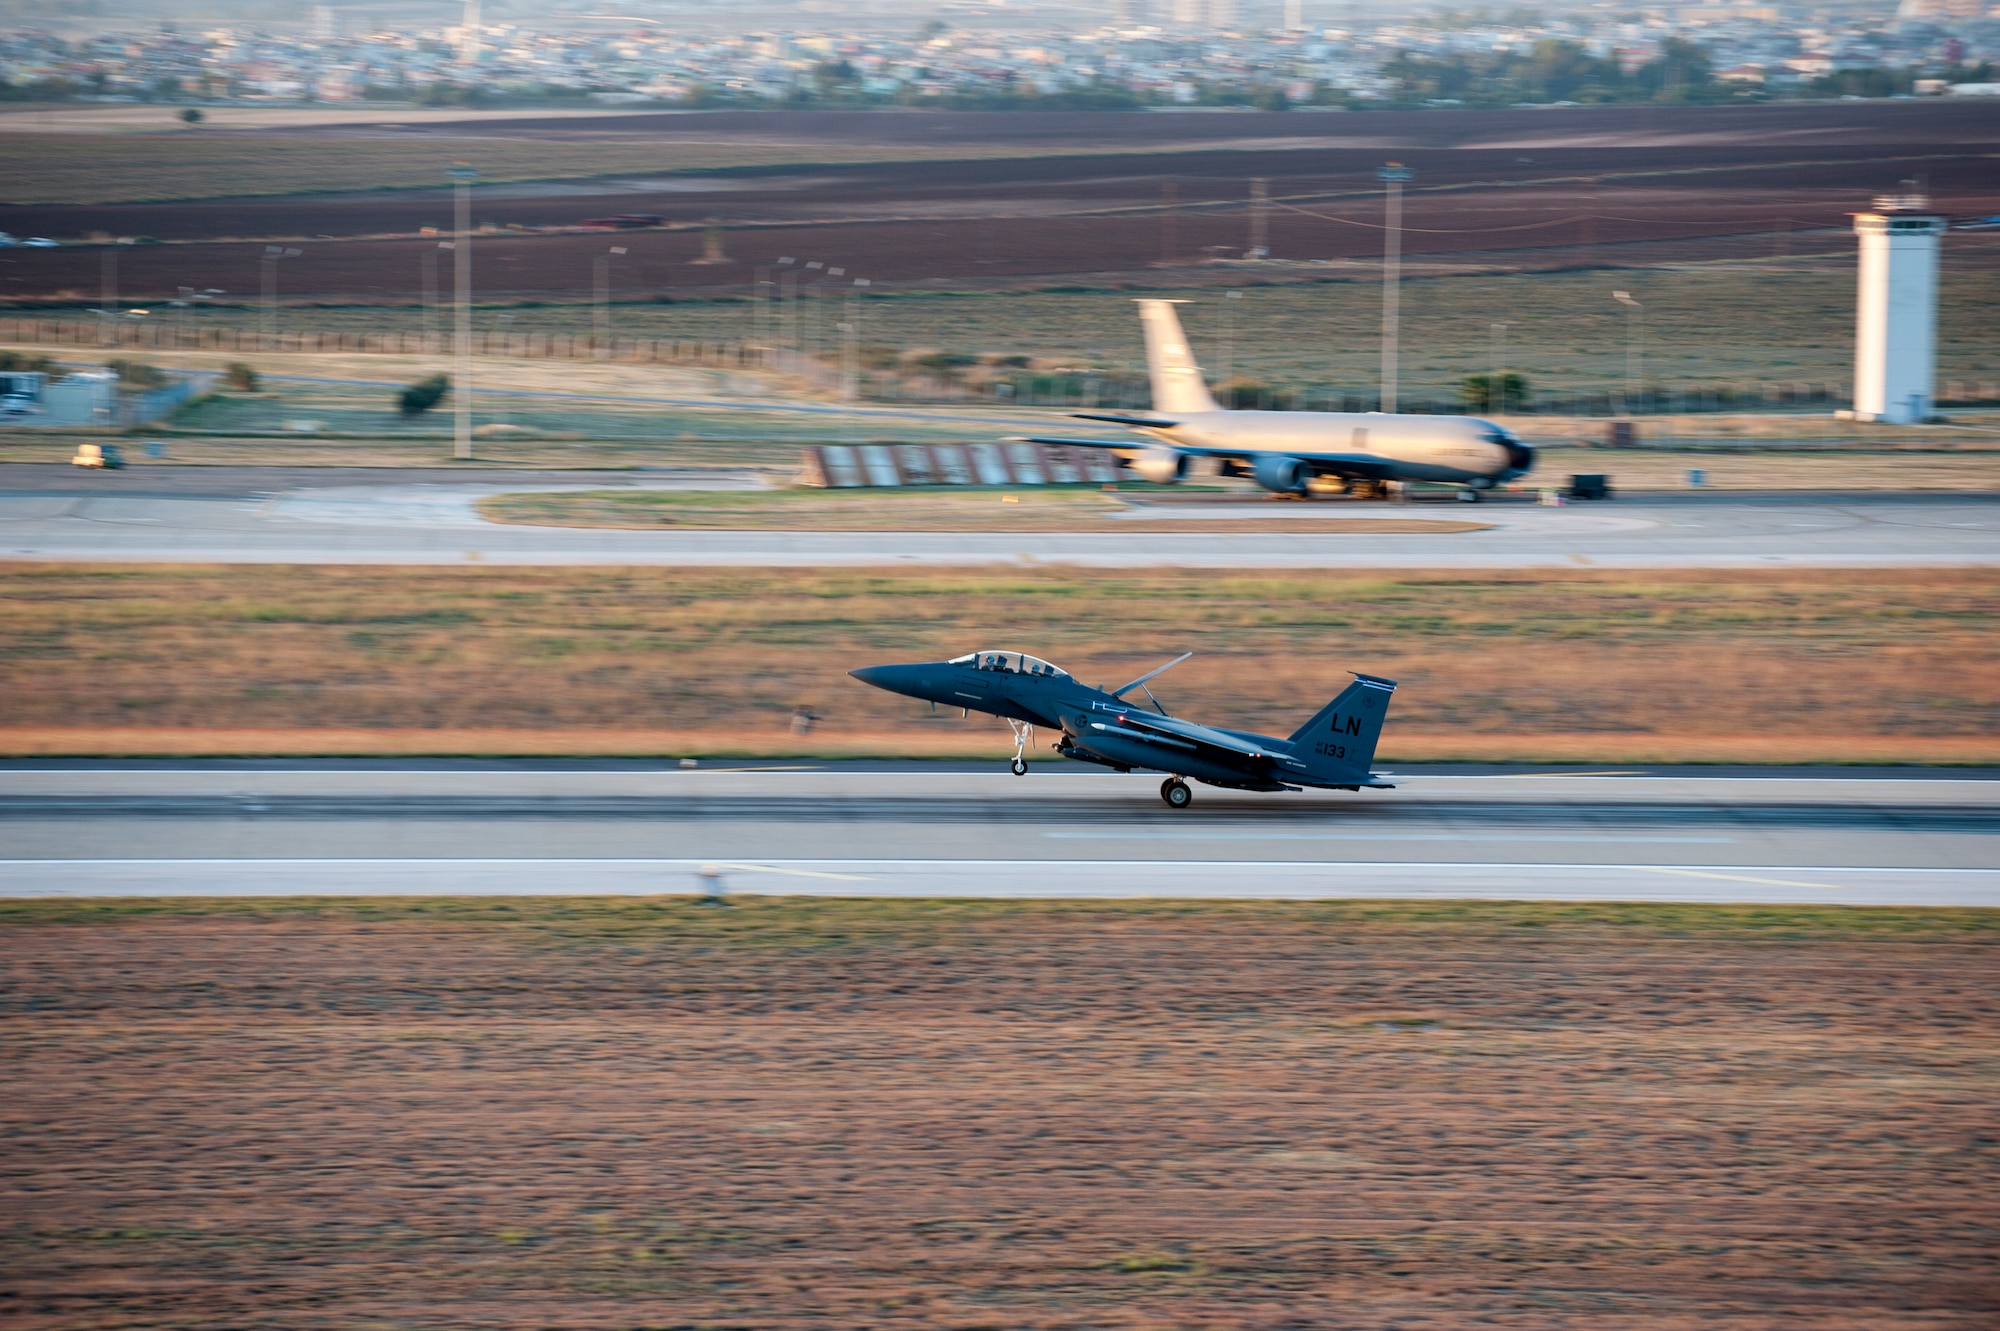 A U.S. Air Force F-15E Strike Eagle lands on the runway Nov. 12, 2015, at Incirlik Air Base, Turkey.  Six F-15Es from the 48th Fighter Wing deployed to Incirlik deployed as a part of Operation Inherent Resolve in coordination with the Turkish Government and to reinforce our shared commitment to the fight against ISIL in Iraq and Syria. These aircraft are designed to perform air-to-air and air-to-ground missions in all weather conditions. (U.S. Air Force photo by Staff Sgt. Jack Sanders/Released)